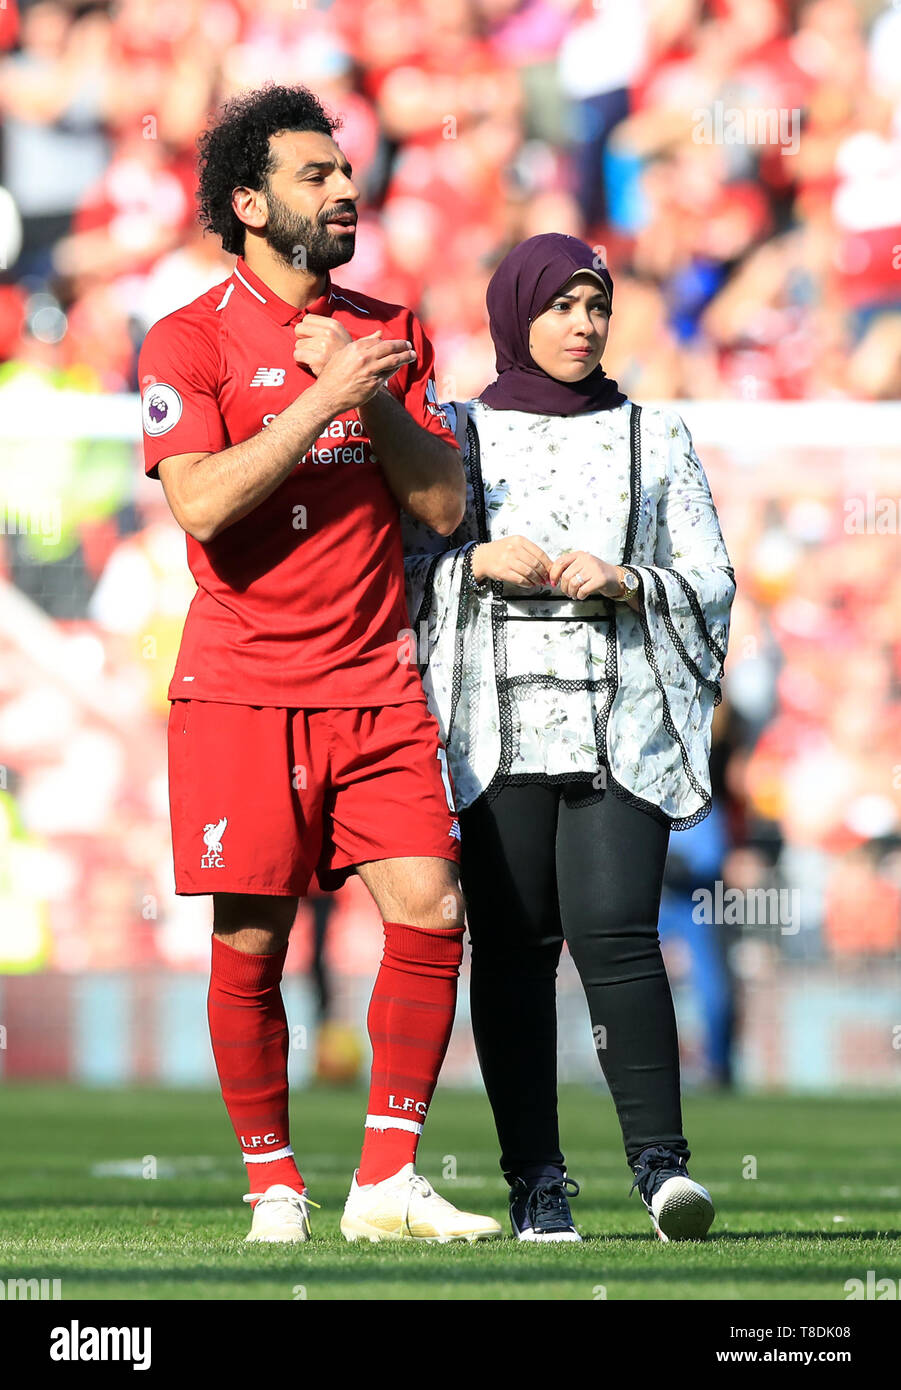 Liverpool's Mohamed Salah with wife Magi after the Premier League match